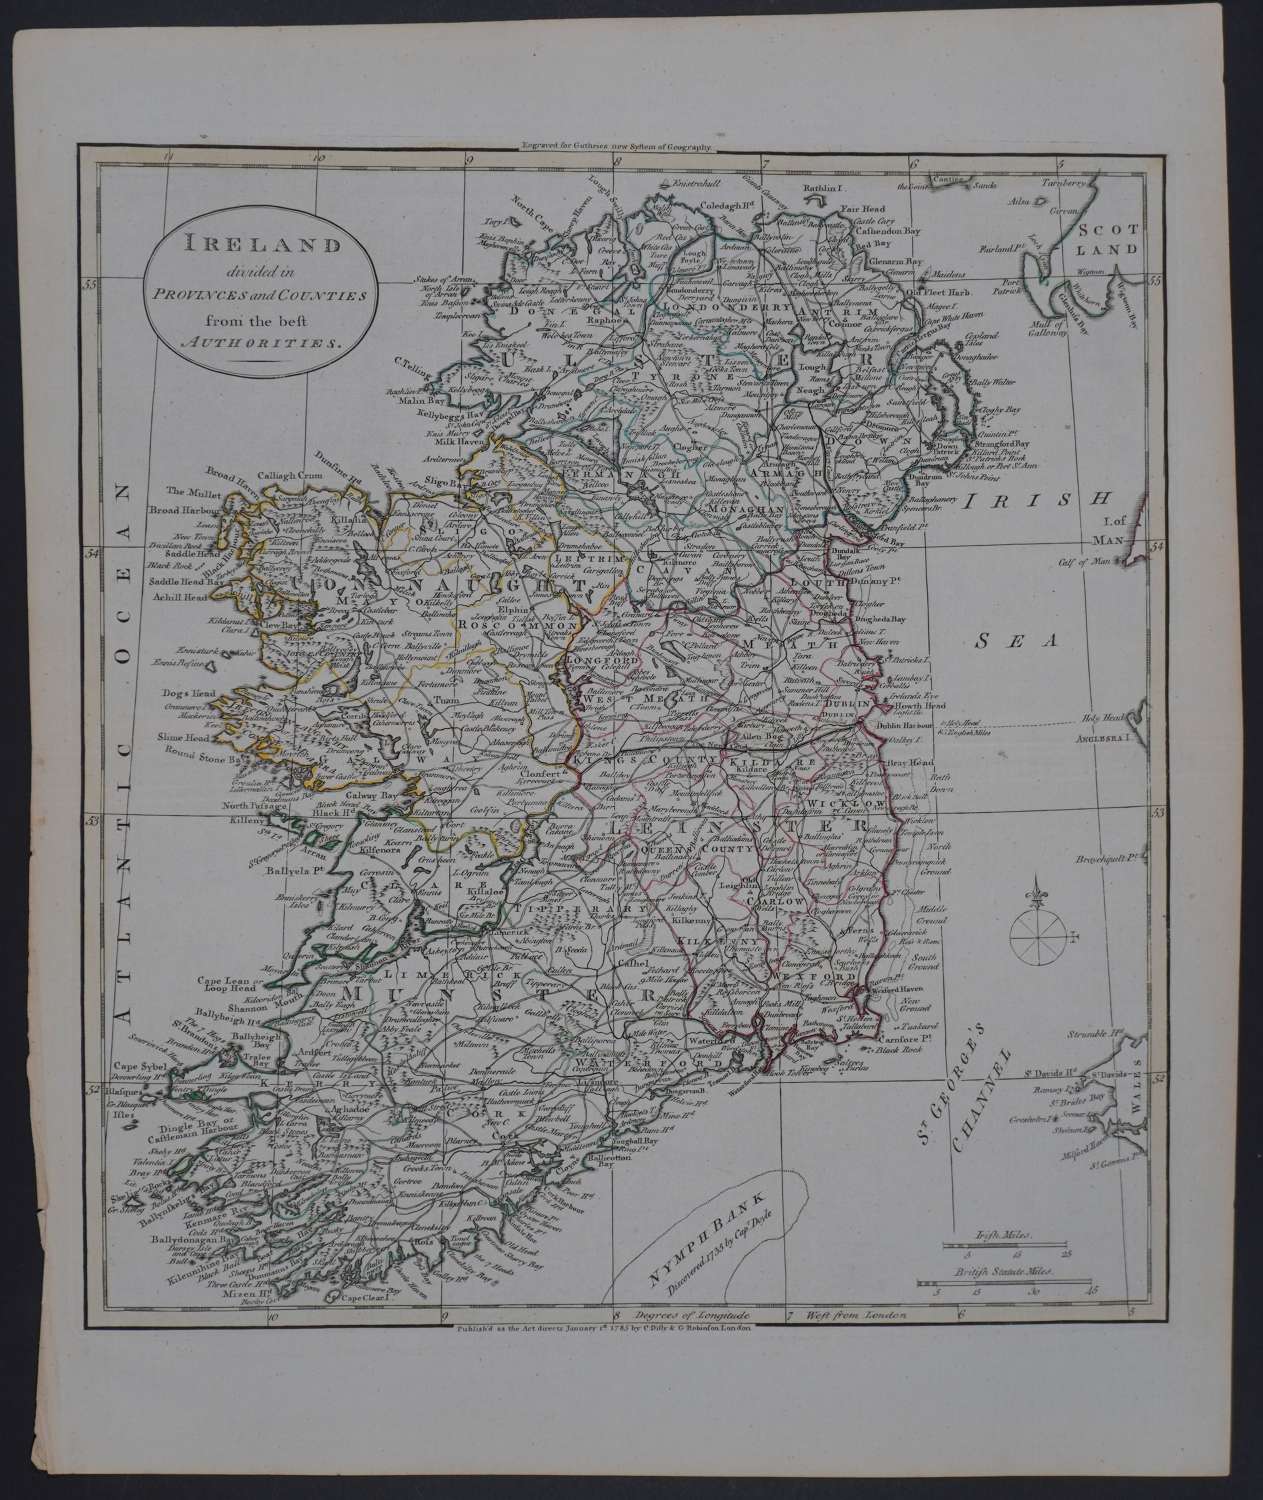 Ireland divided in Provinces by William Guthrie